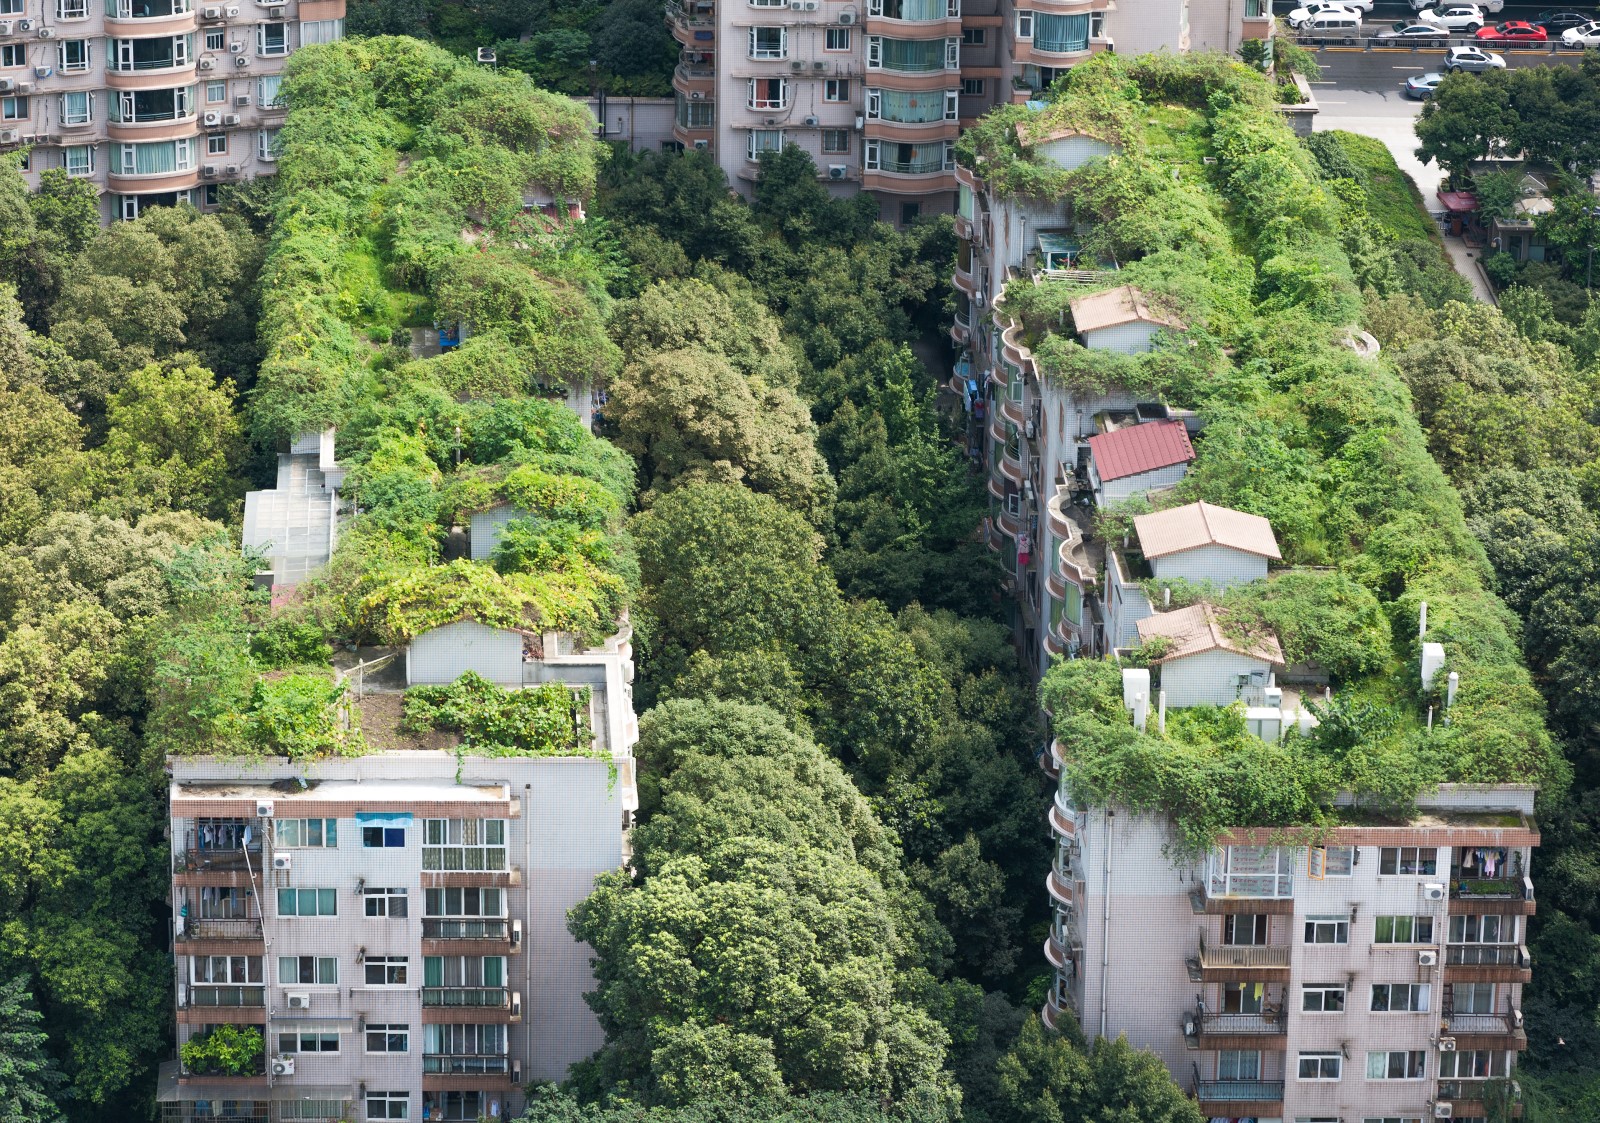 Smart green roofs